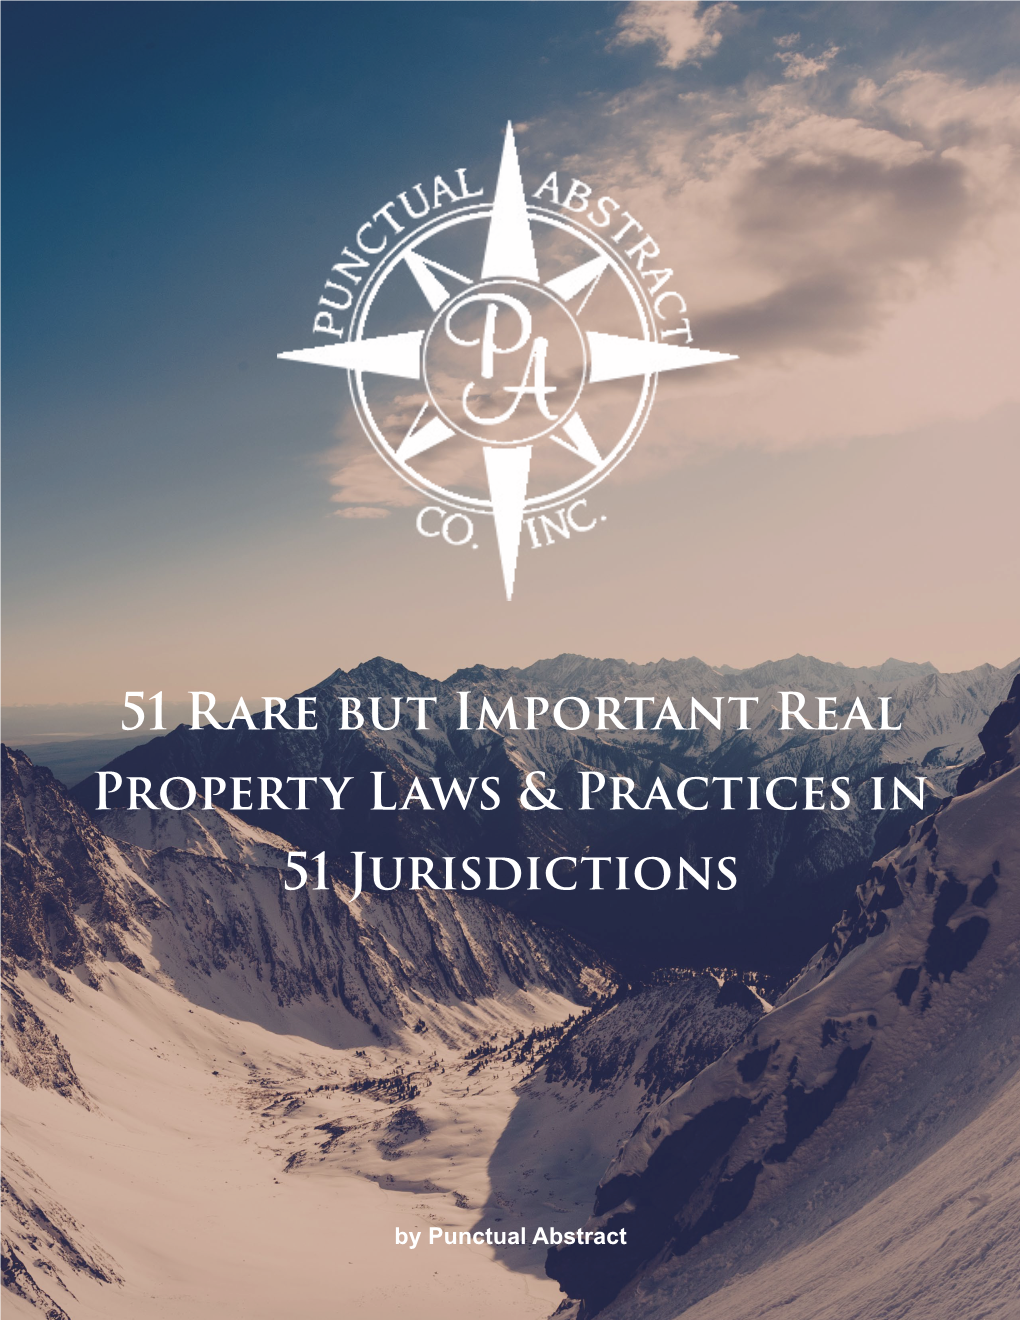 51 Rare but Important Real Property Laws & Practices in 51 Jurisdictions